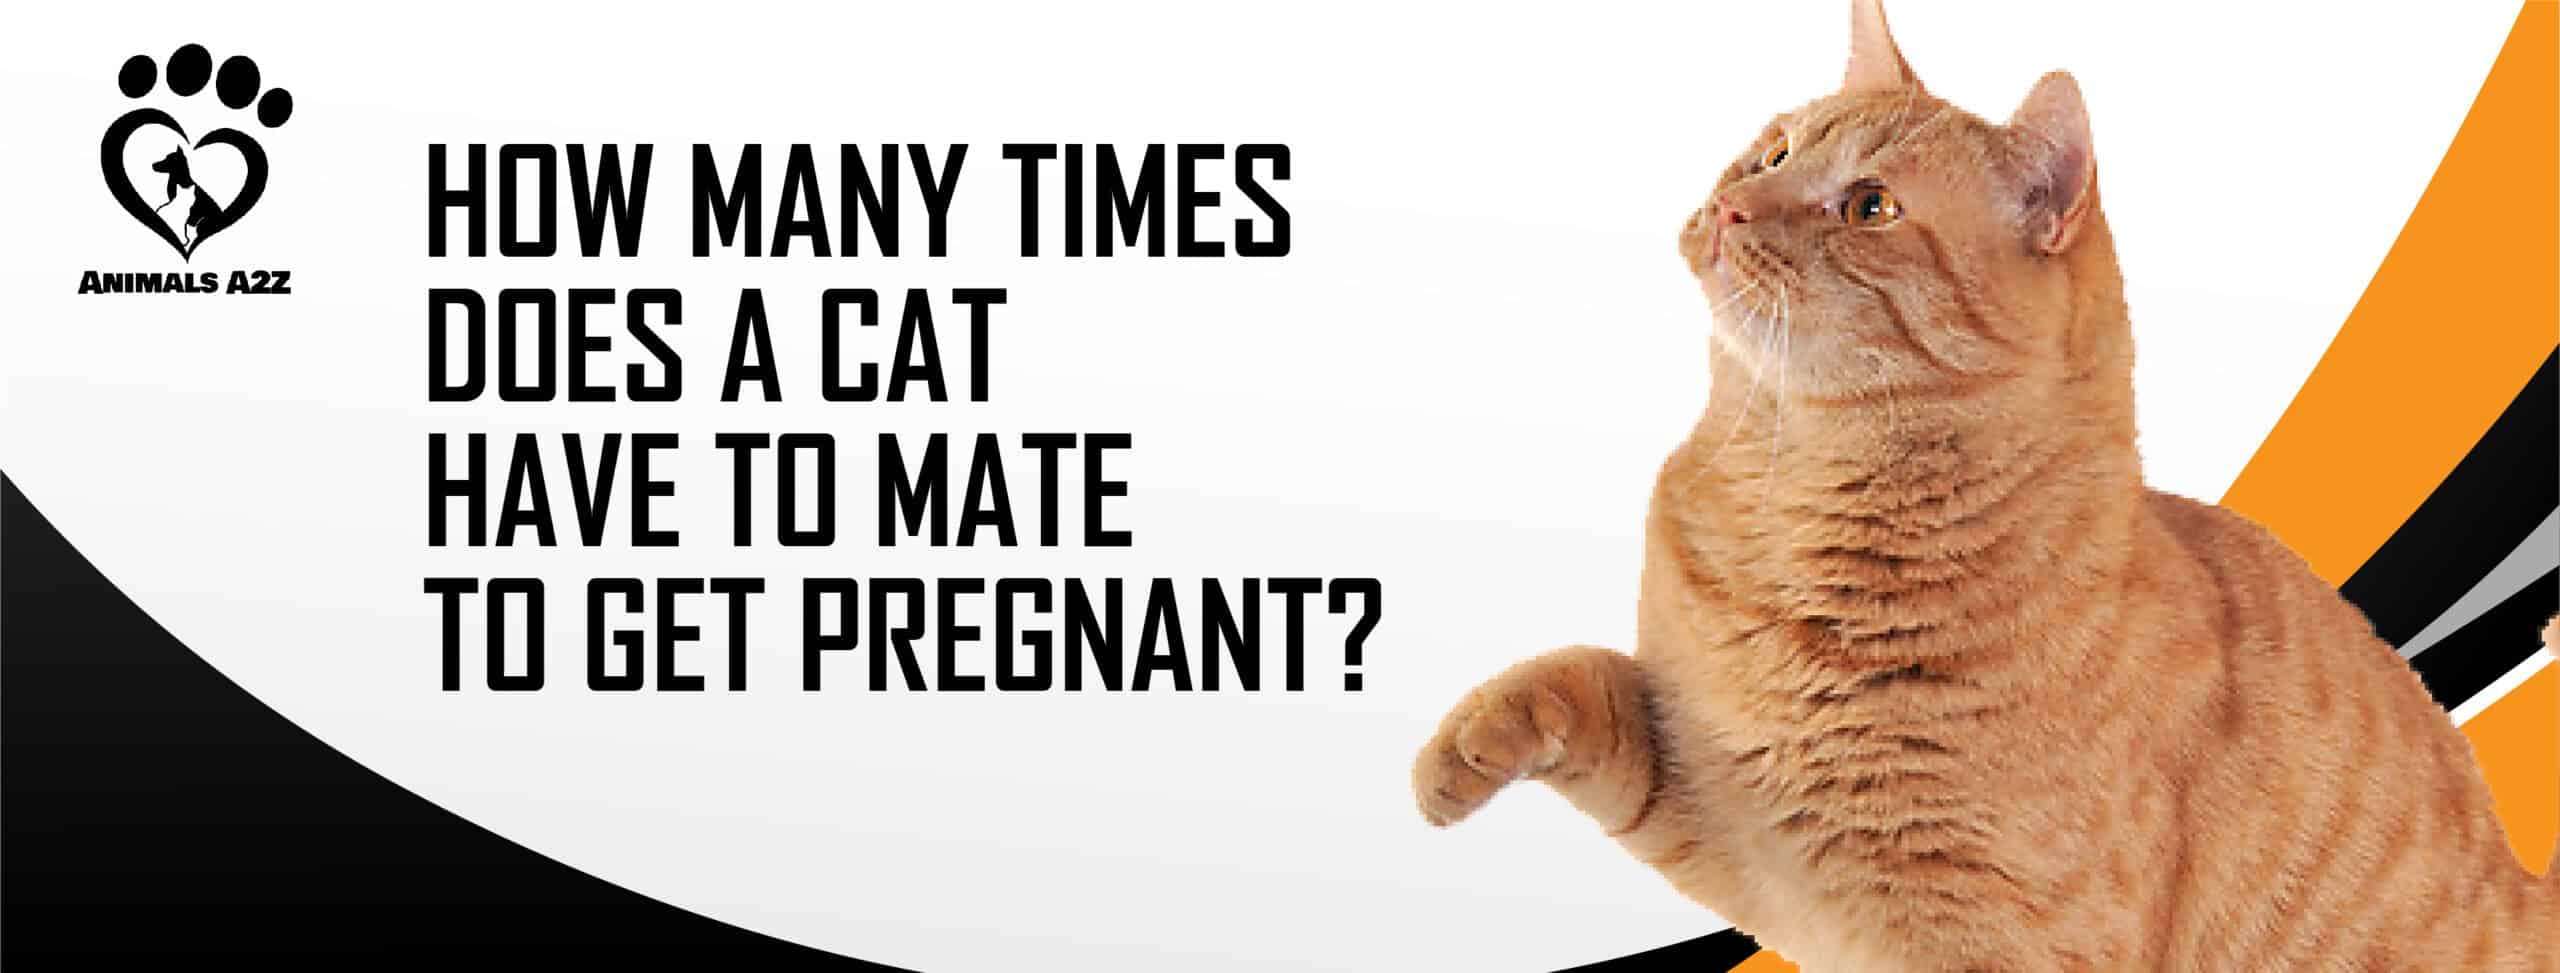 How many times does a cat have to mate to get pregnant